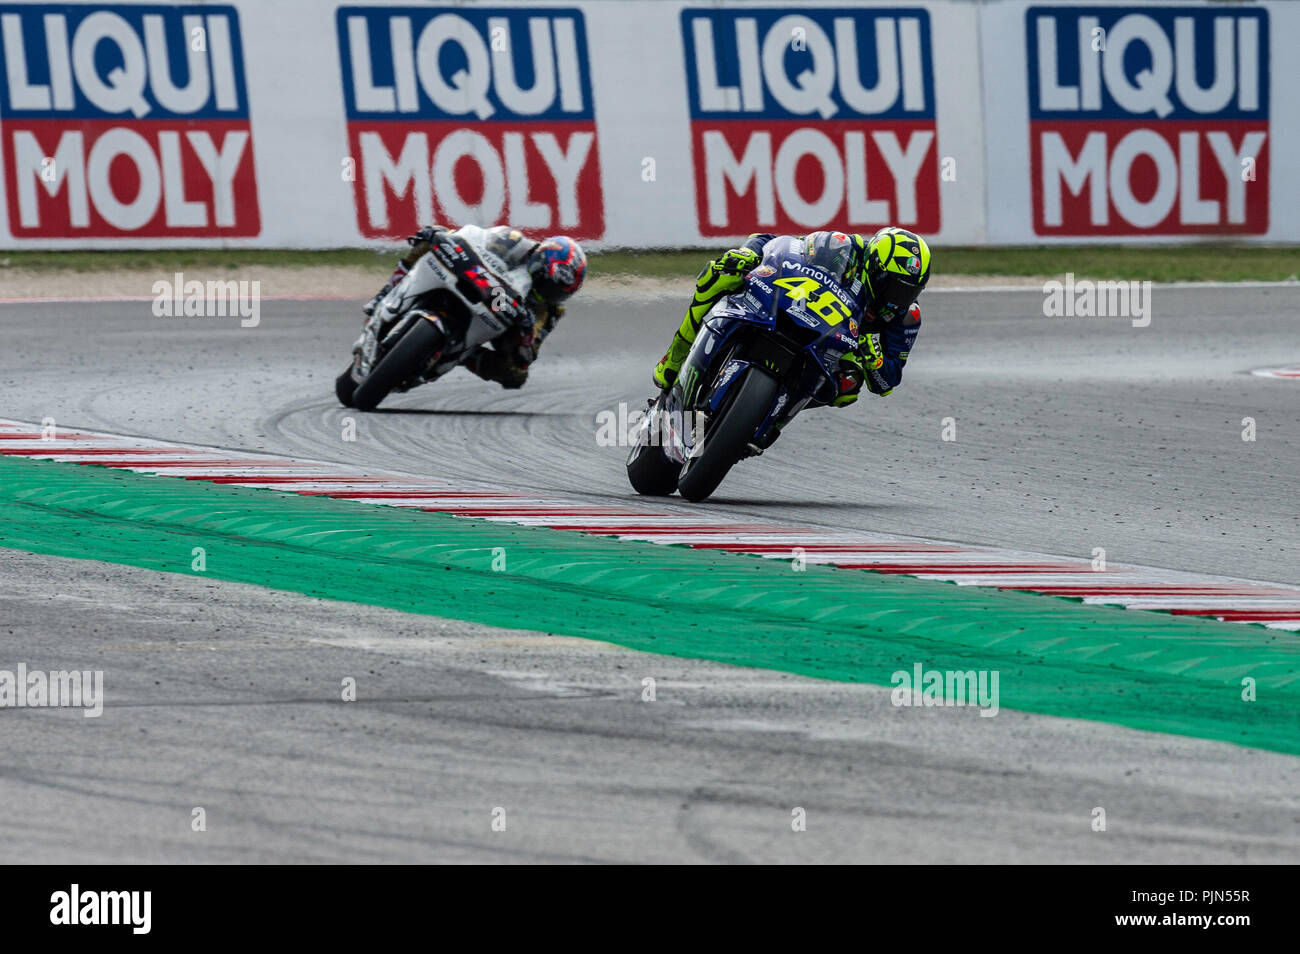 Misano Adriatico, Italy. 07th Sep, 2018. Valentino Rossi and Karel Abraham during Friday FP2 in Misano Credit: Lorenzo Di Cola/Pacific Press/Alamy Live News Stock Photo